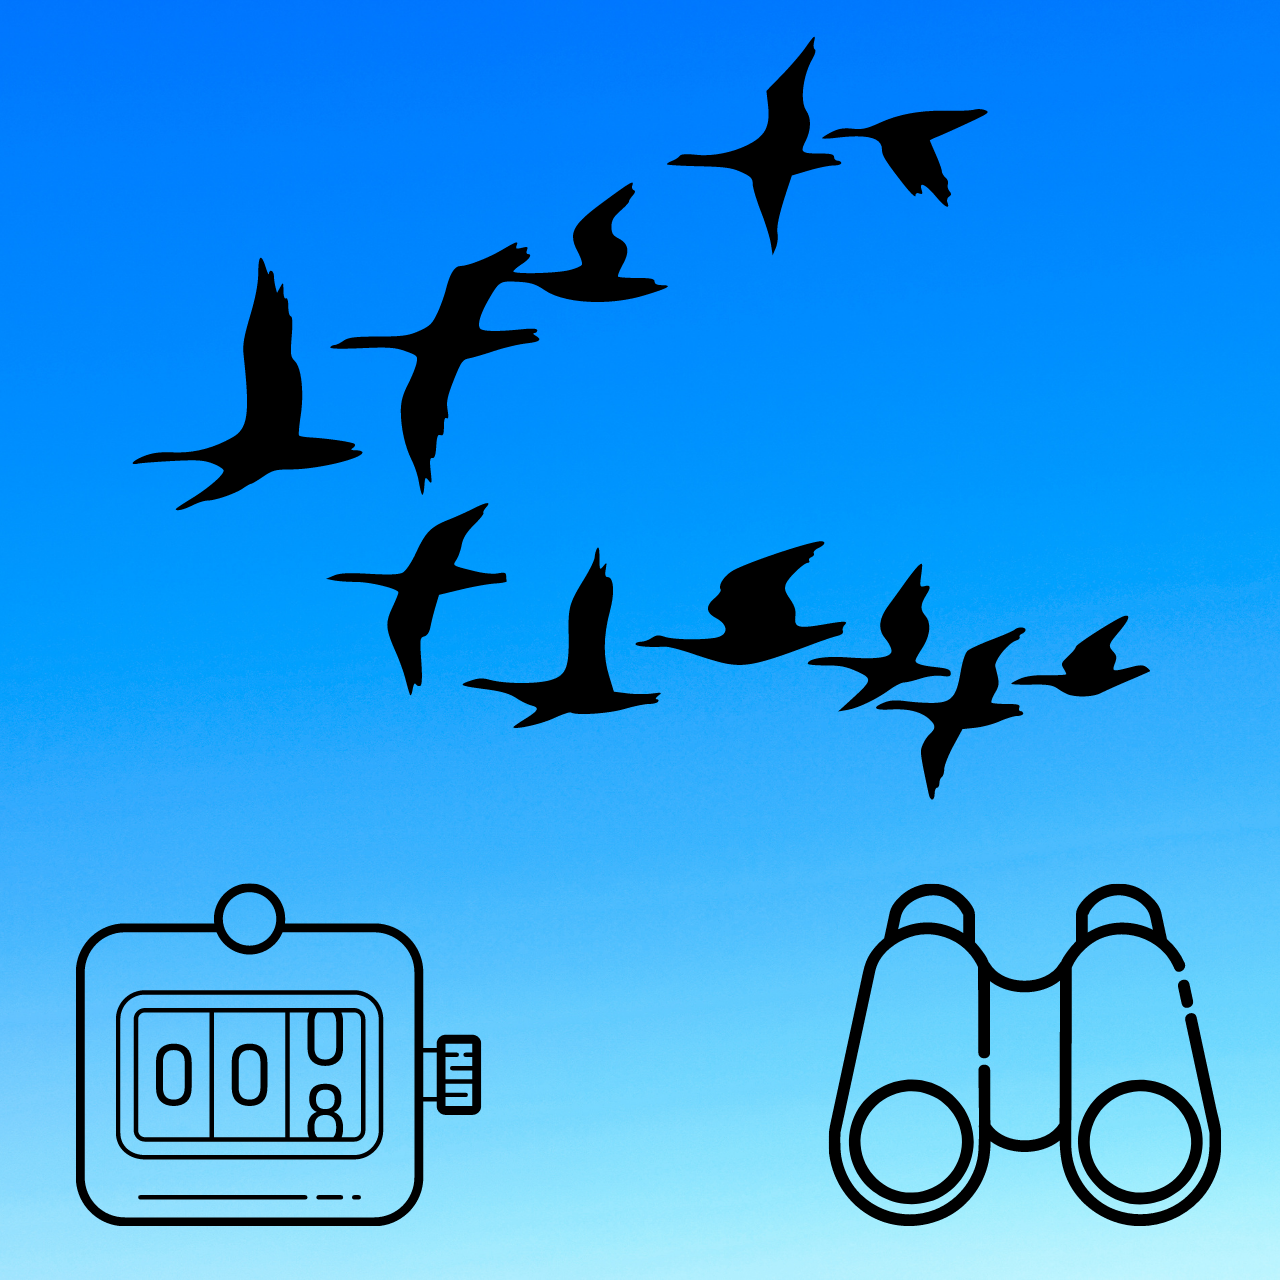 Birds, binoculars, and counting device set against a sky background.